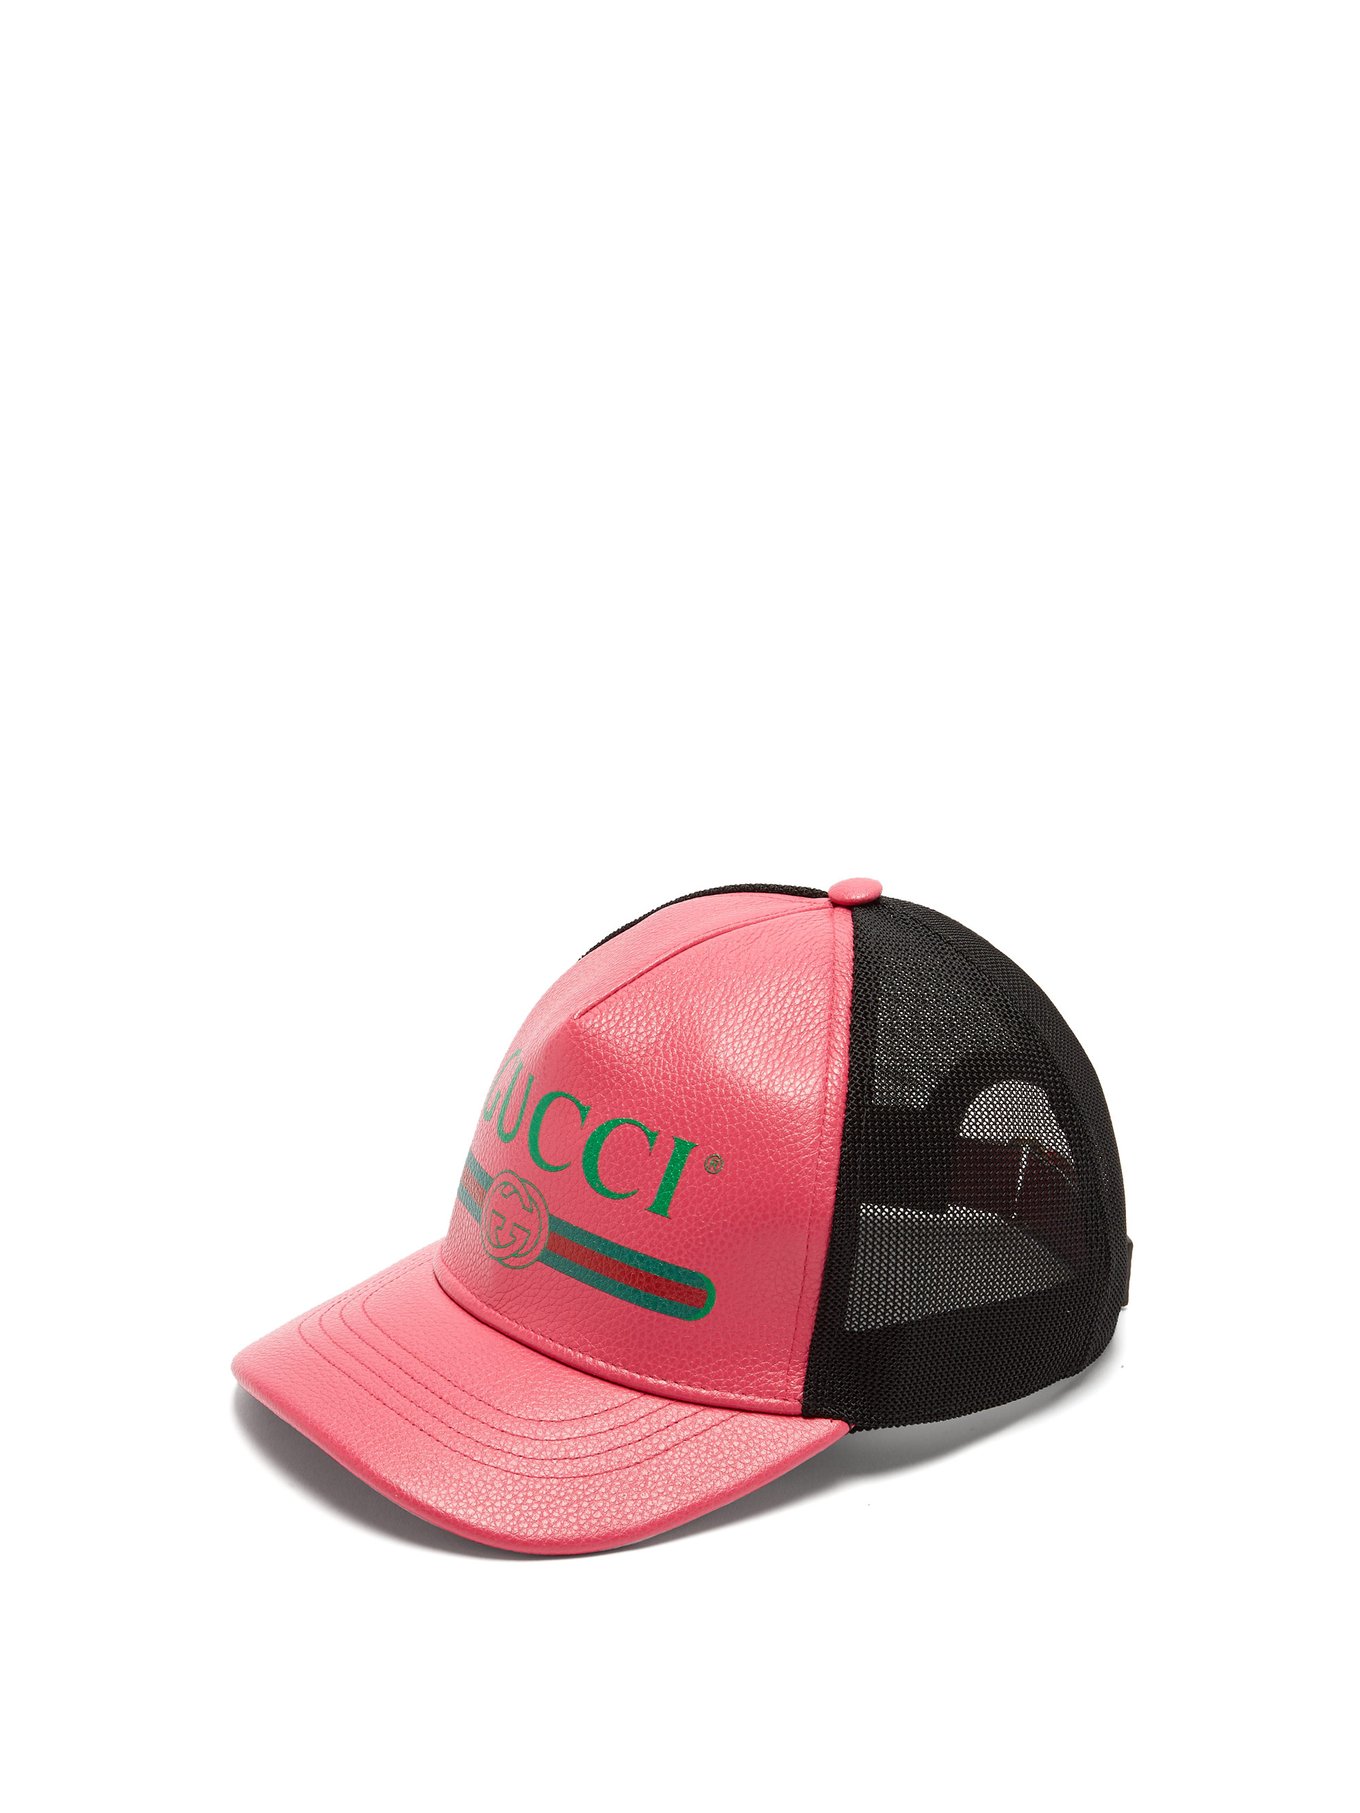 gucci leather hat